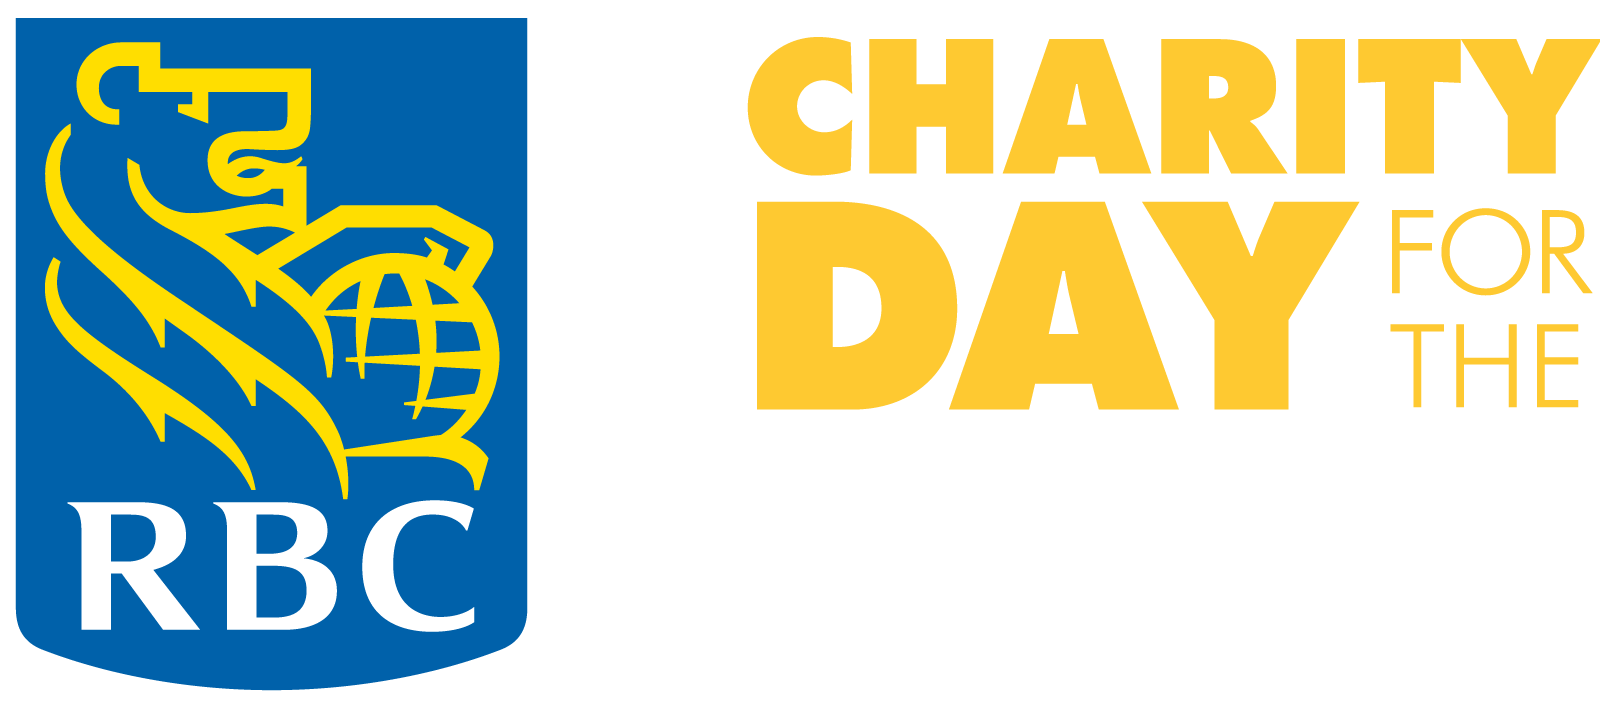 RBC Charity Day for the Kids